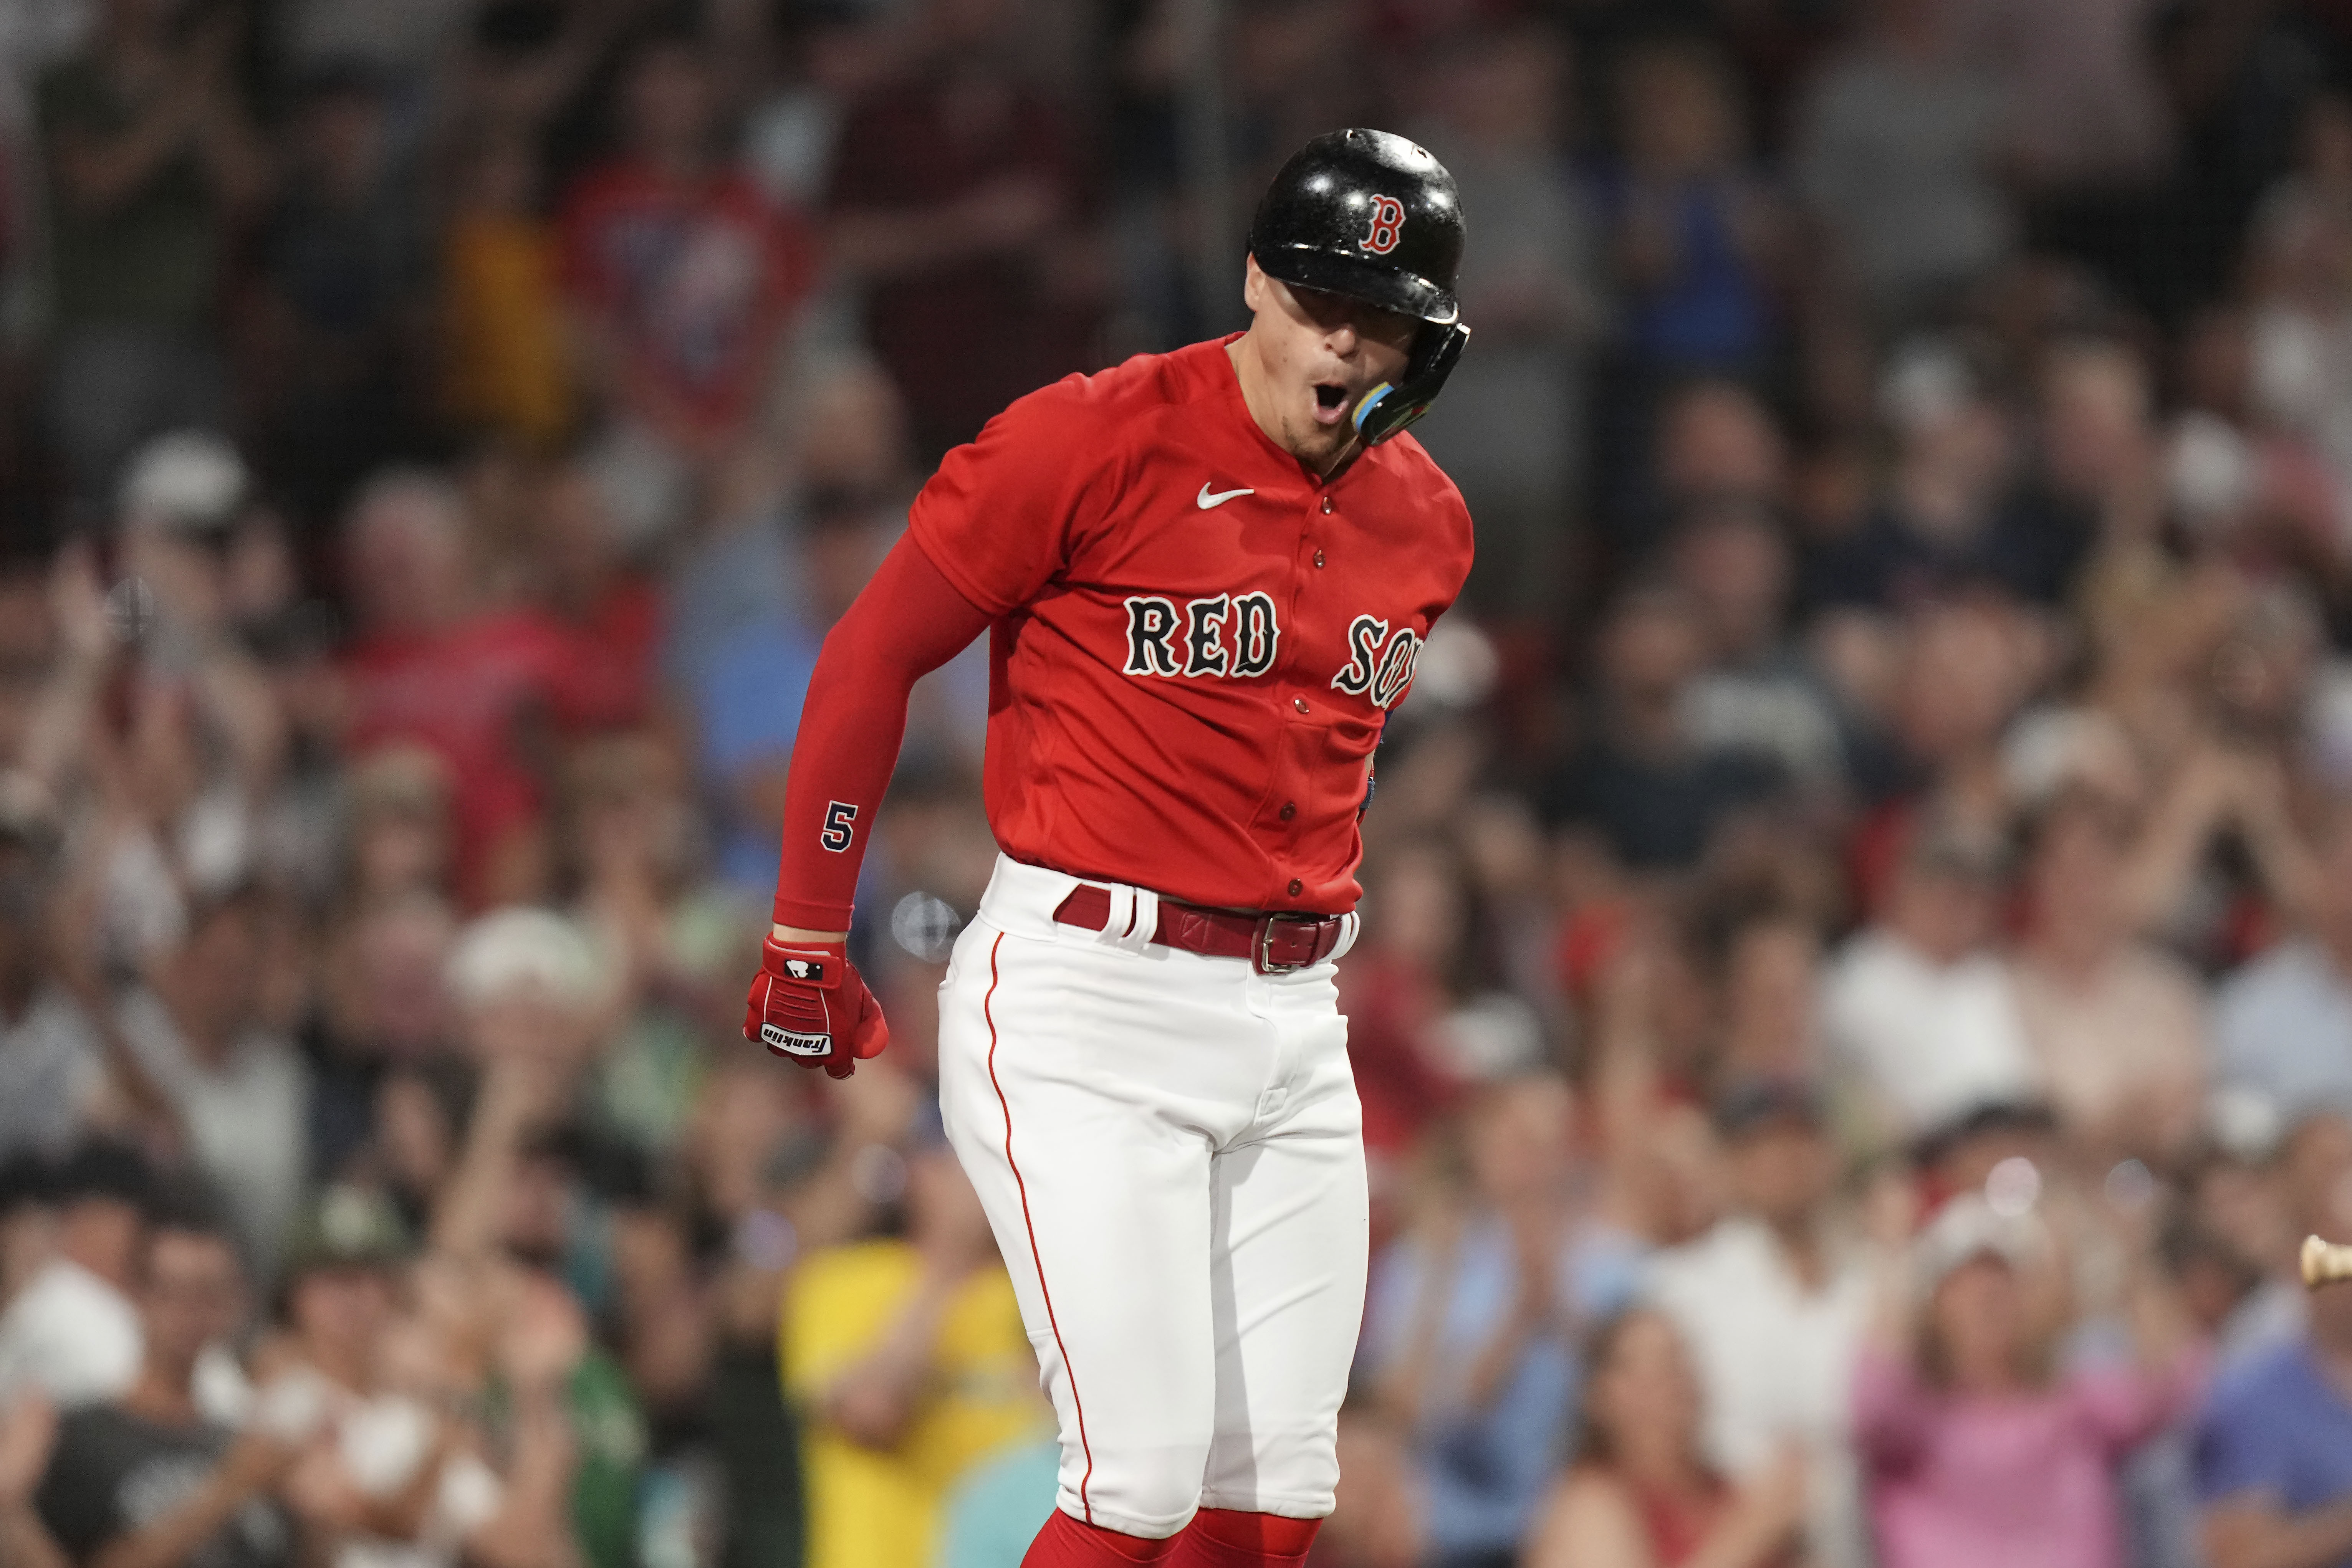 Chris Sale in 2023 Could Bounce Back Strong